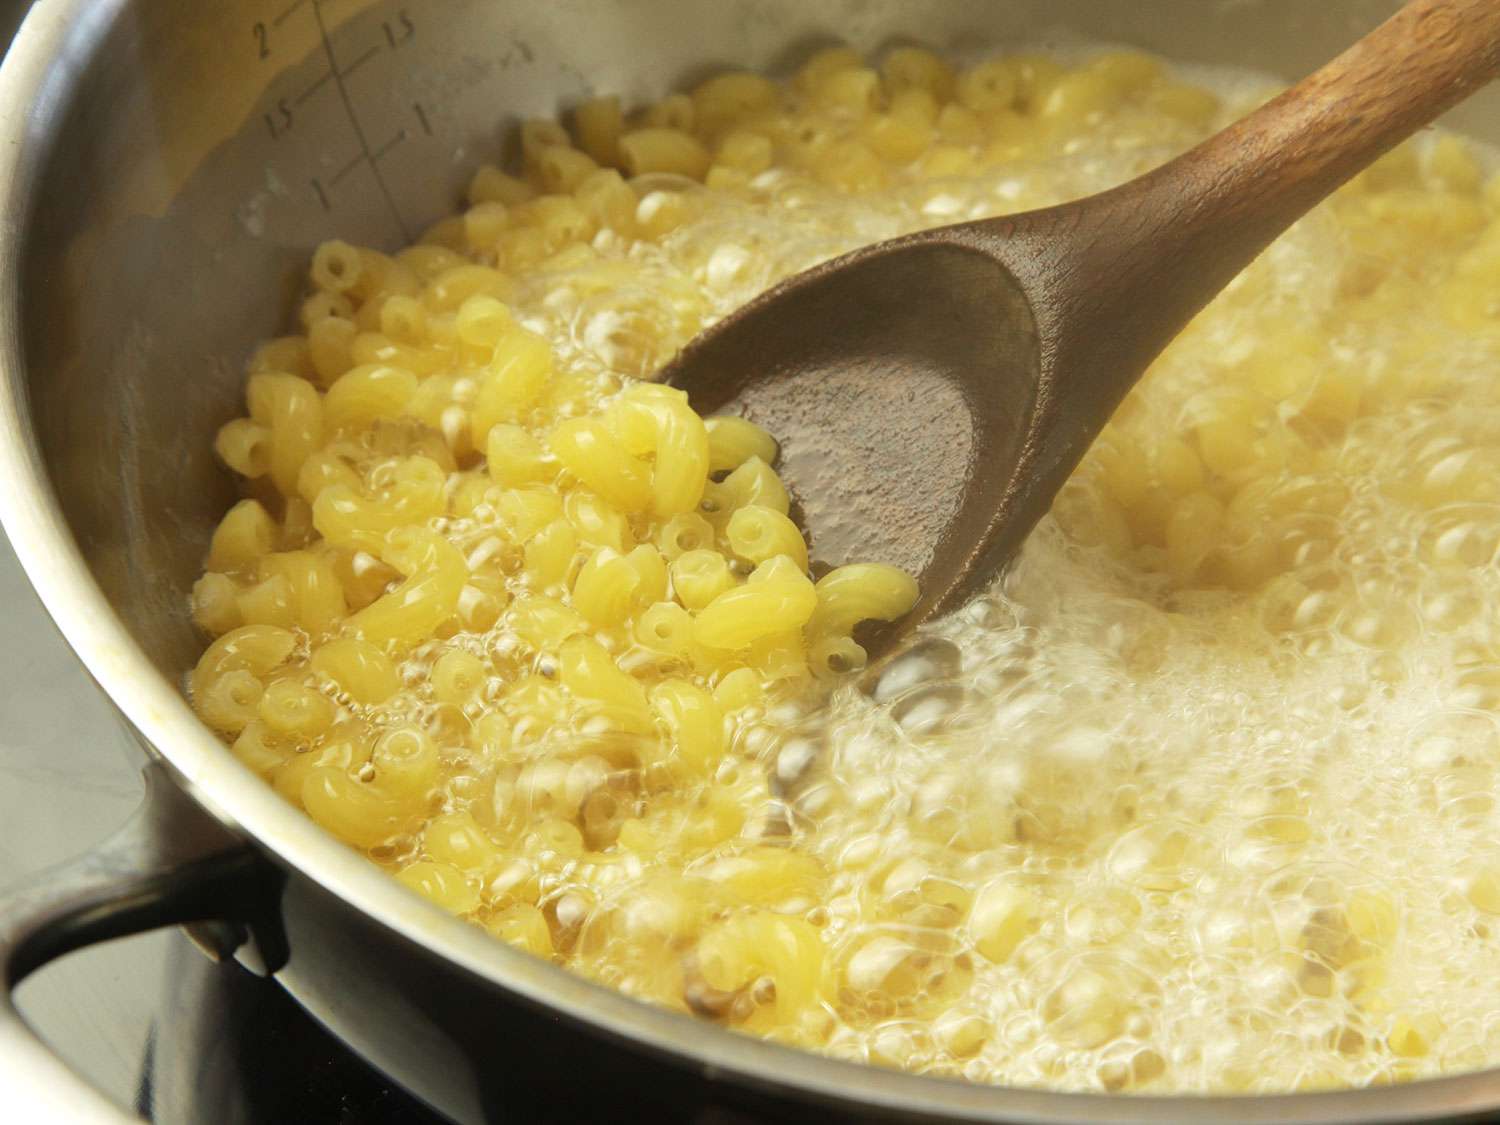 Macaroni in a boiling pot of water, being stirred. There is only just enough water to cover the pasta, which helps concentrate starch.